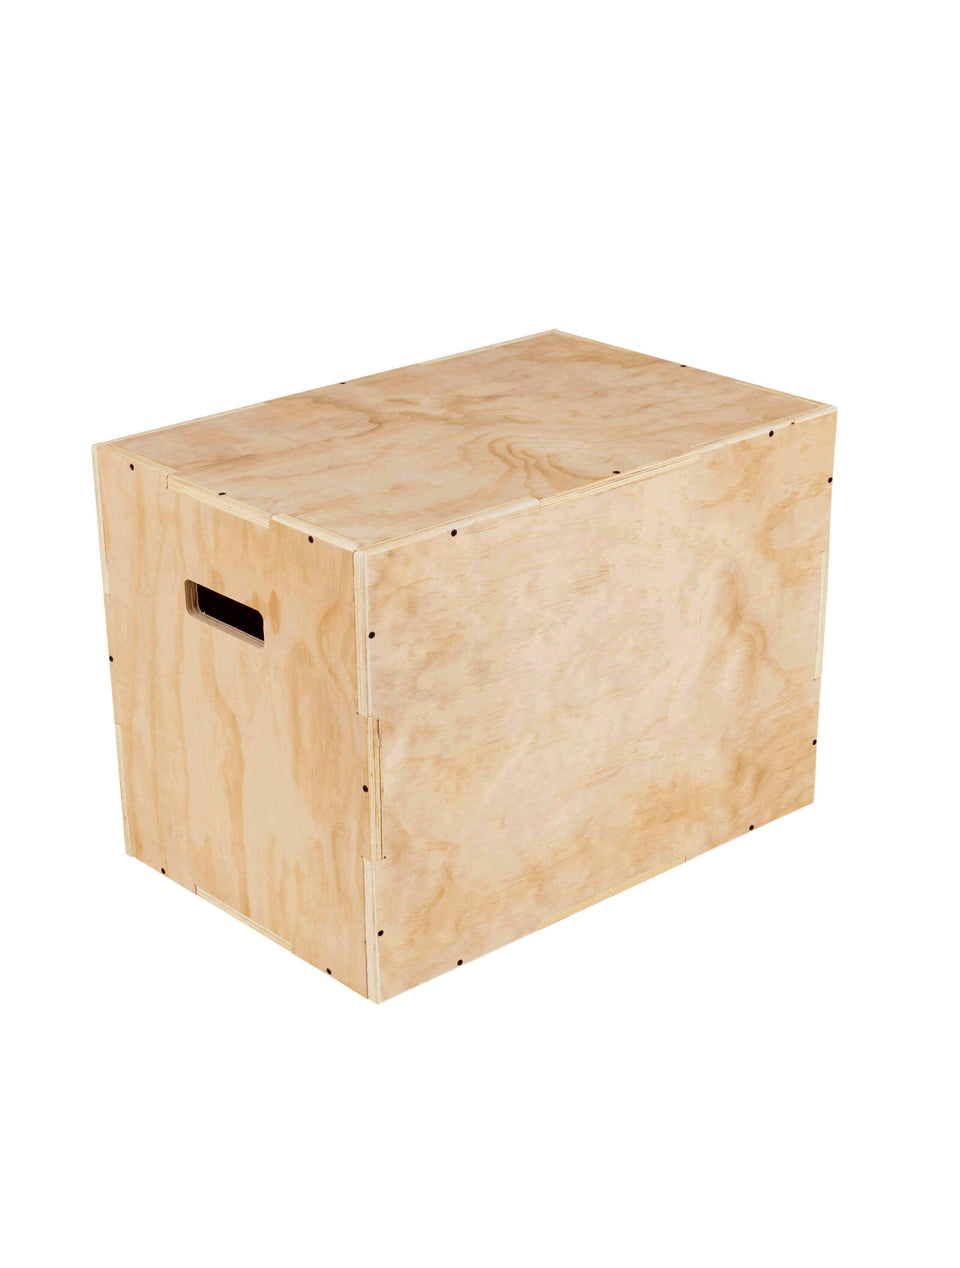 3 IN 1 Wooden Plyo Box Small in Size - (12'' x 11'' x 16'' Inches)